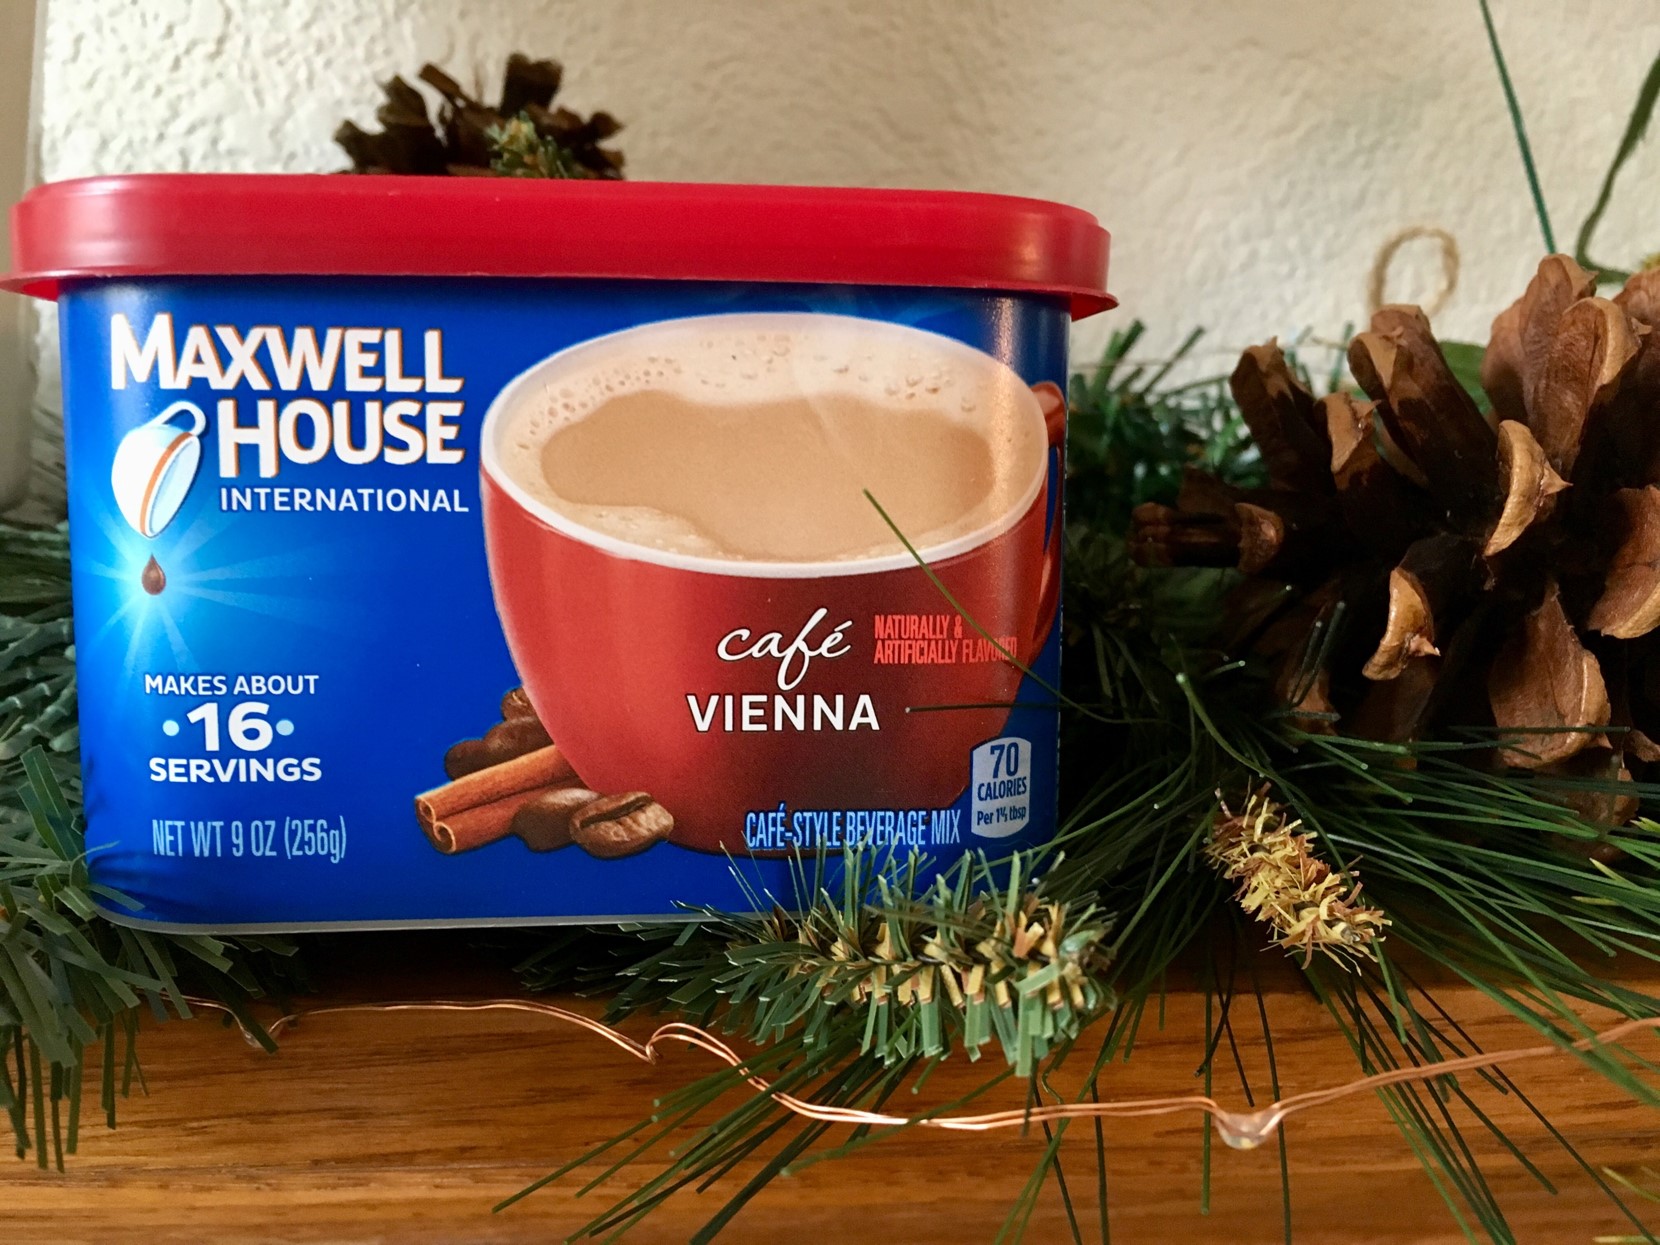 Box of Maxwell House instant coffee on mantle next to Christmas decorations